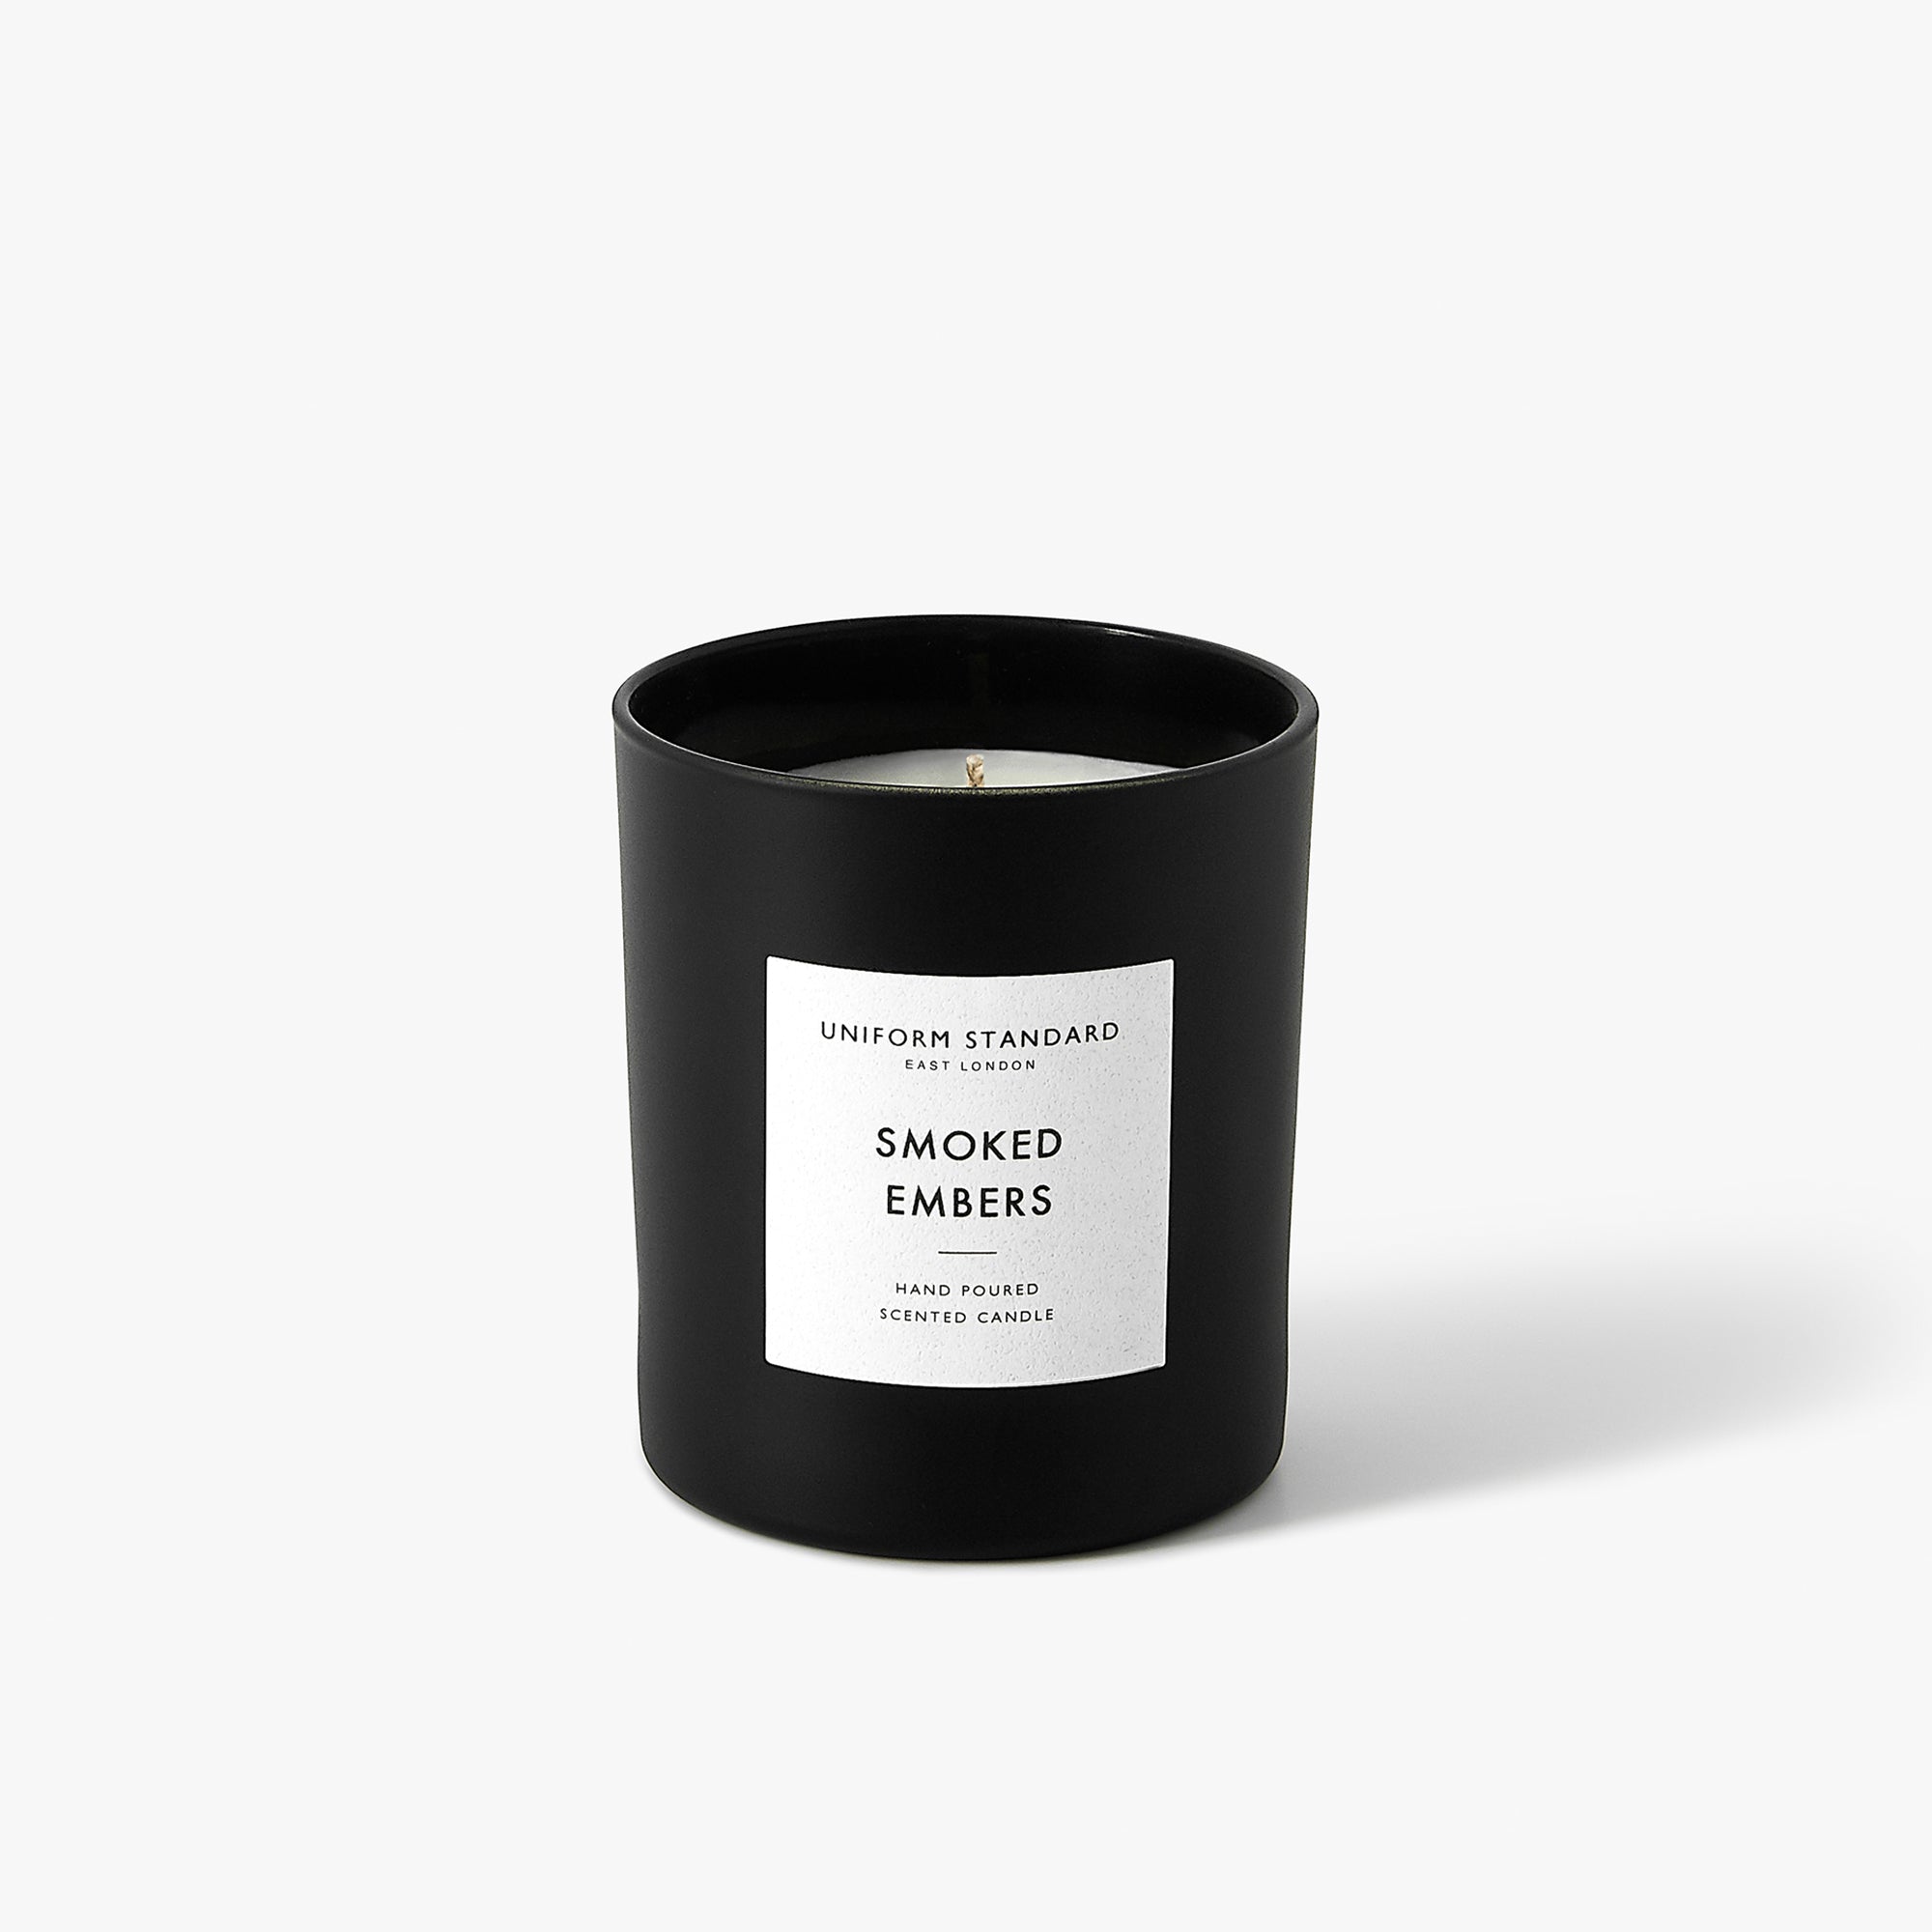 Smoked Embers Scented Candle